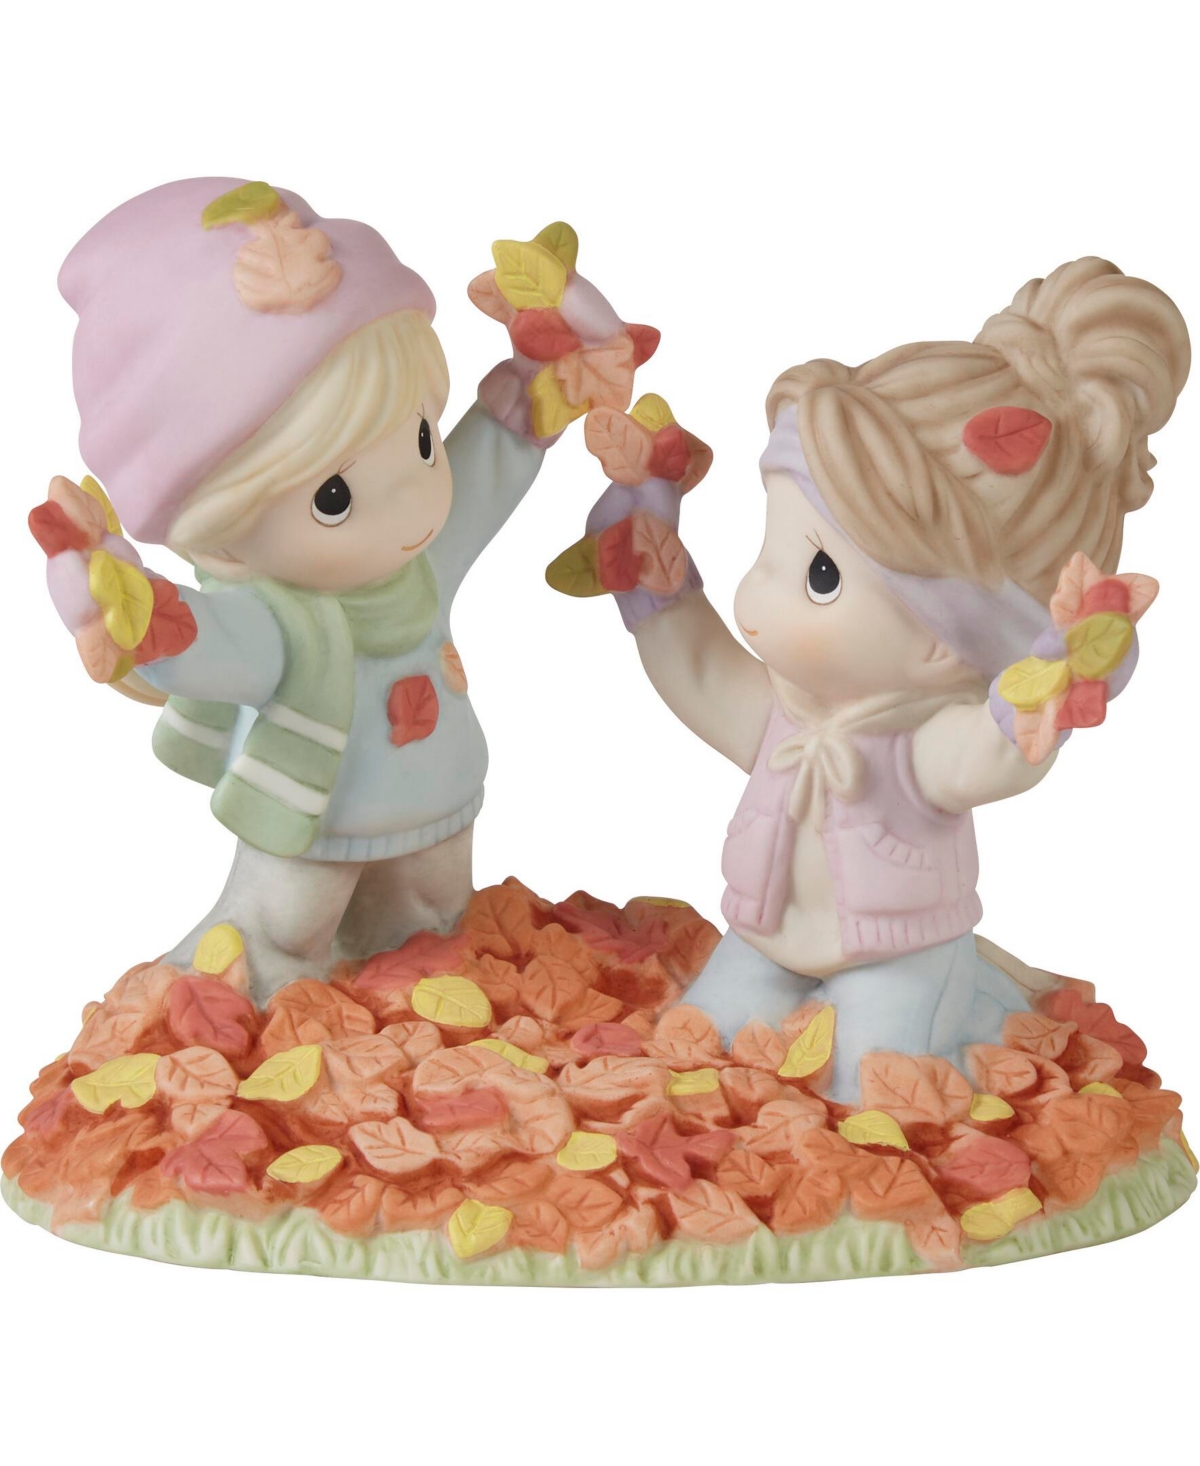 Precious Moments You Make Life More Colorful Bisque Porcelain Figurine In Multicolored